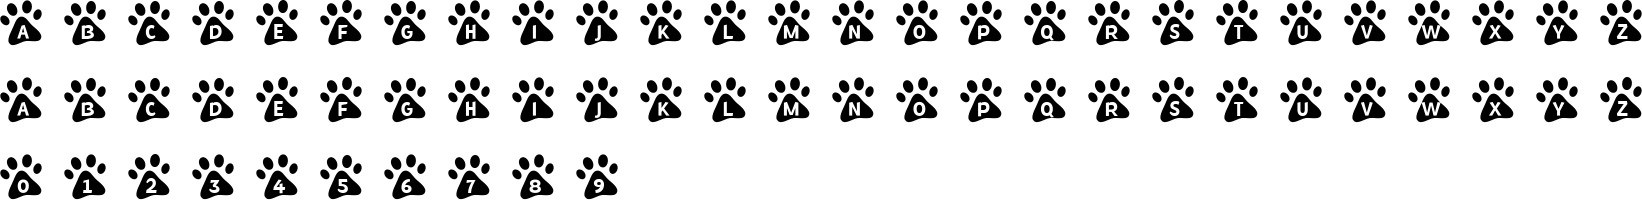 Mf Paw Prints Character Map